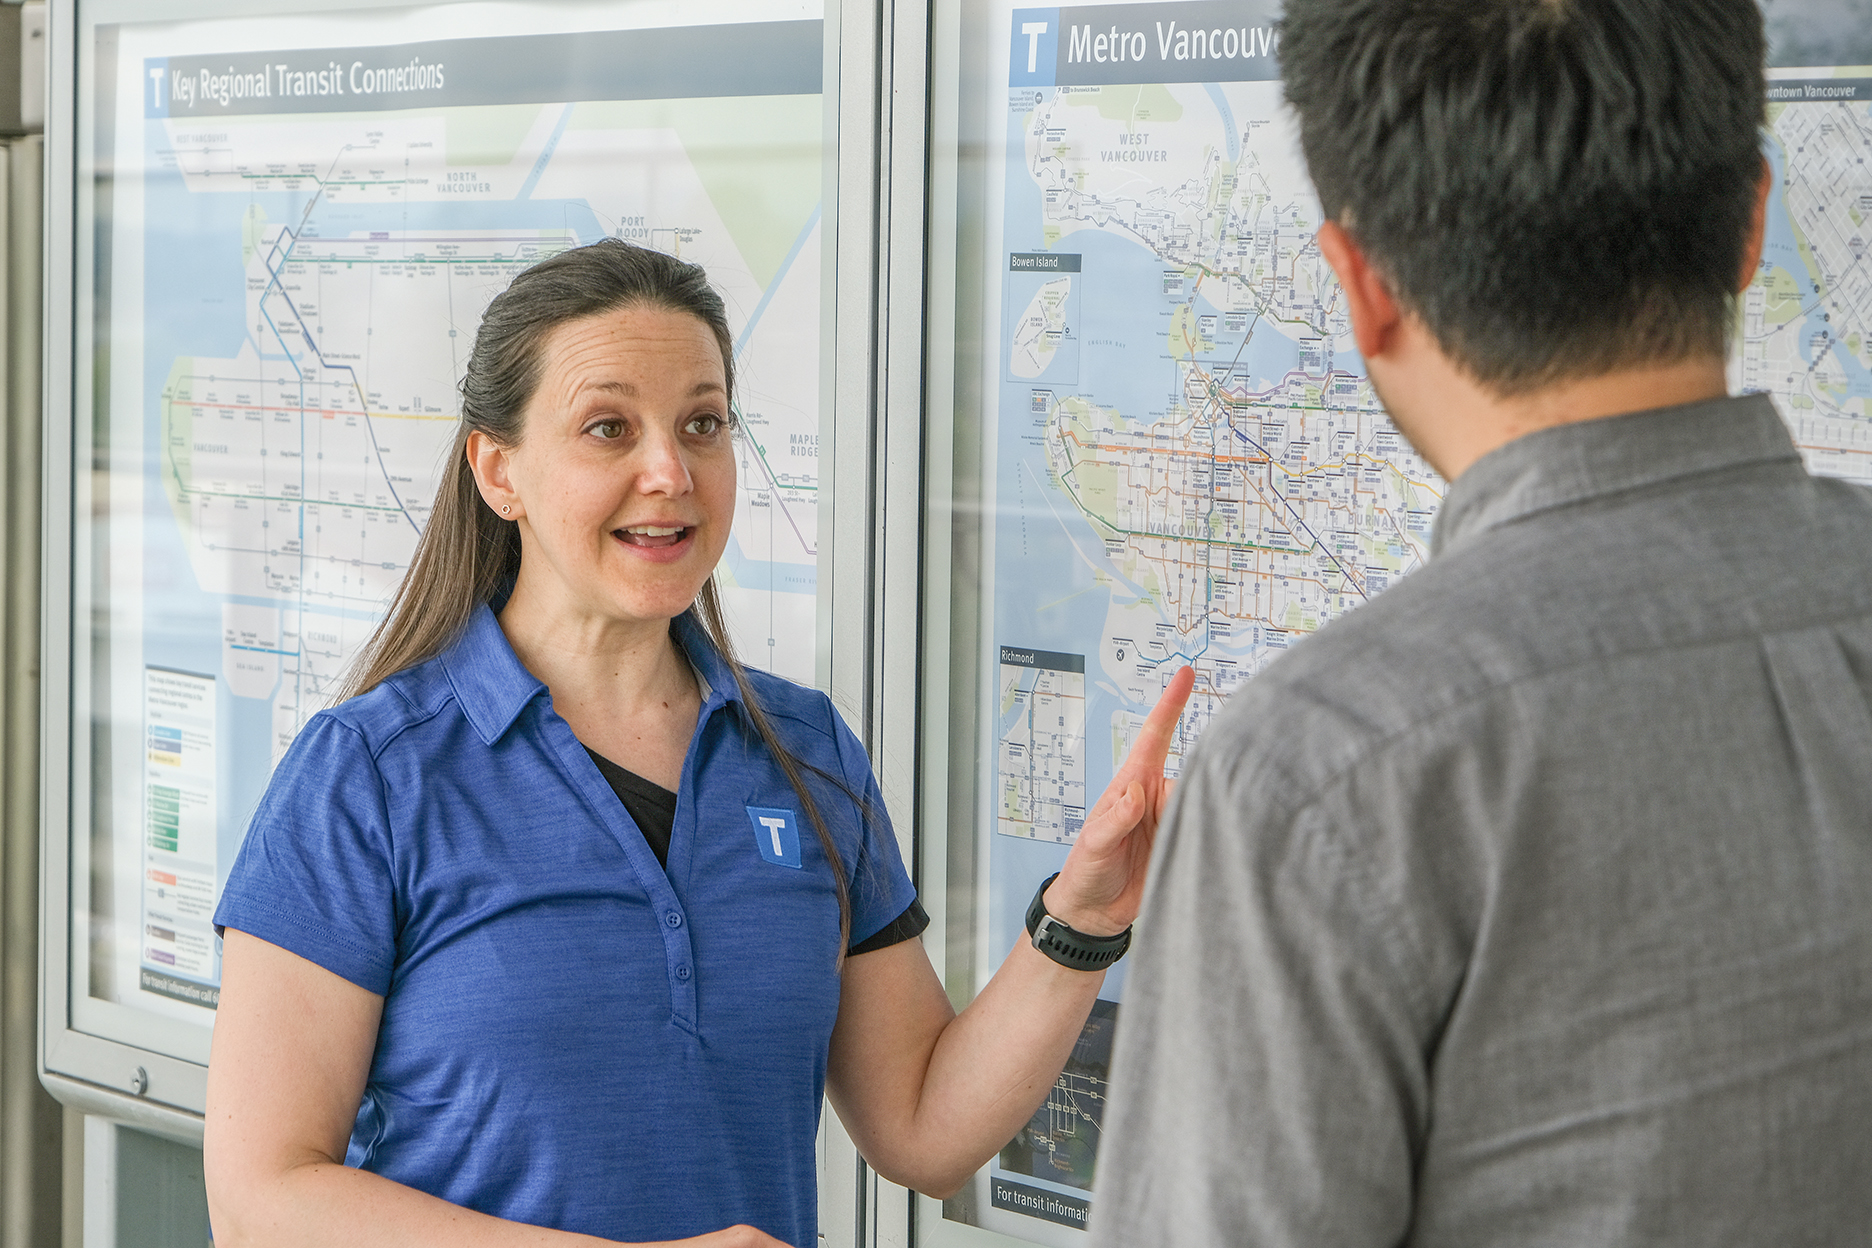 A TransLink volunteer helps a transit customer while pointing at transit system map.